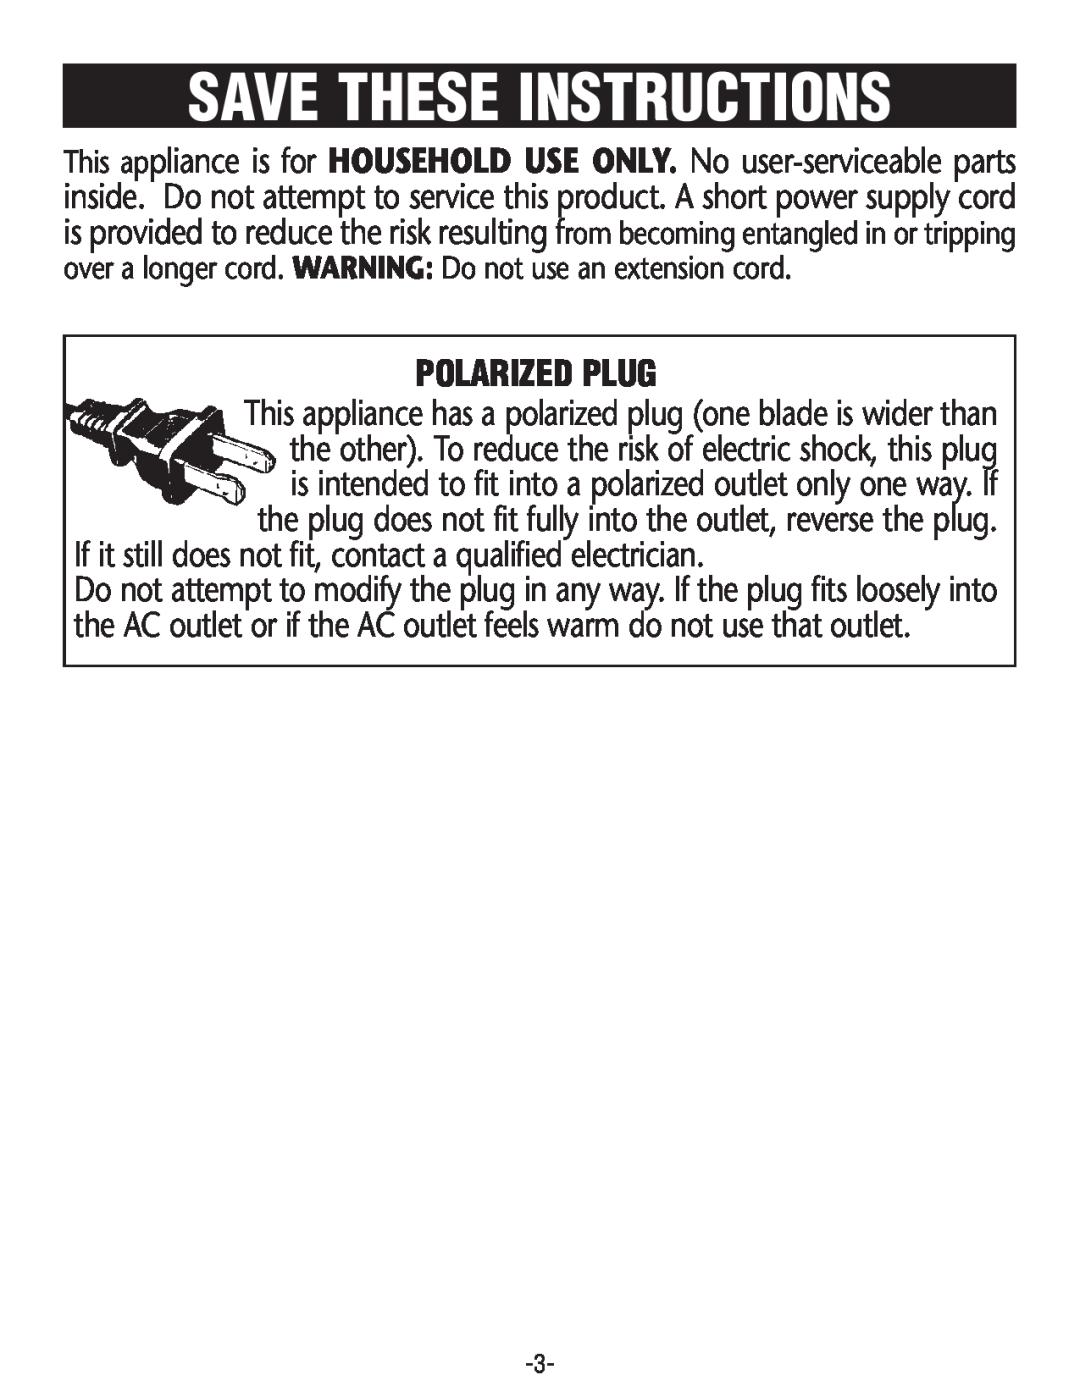 Rival BD250 manual Save These Instructions, Polarized Plug 